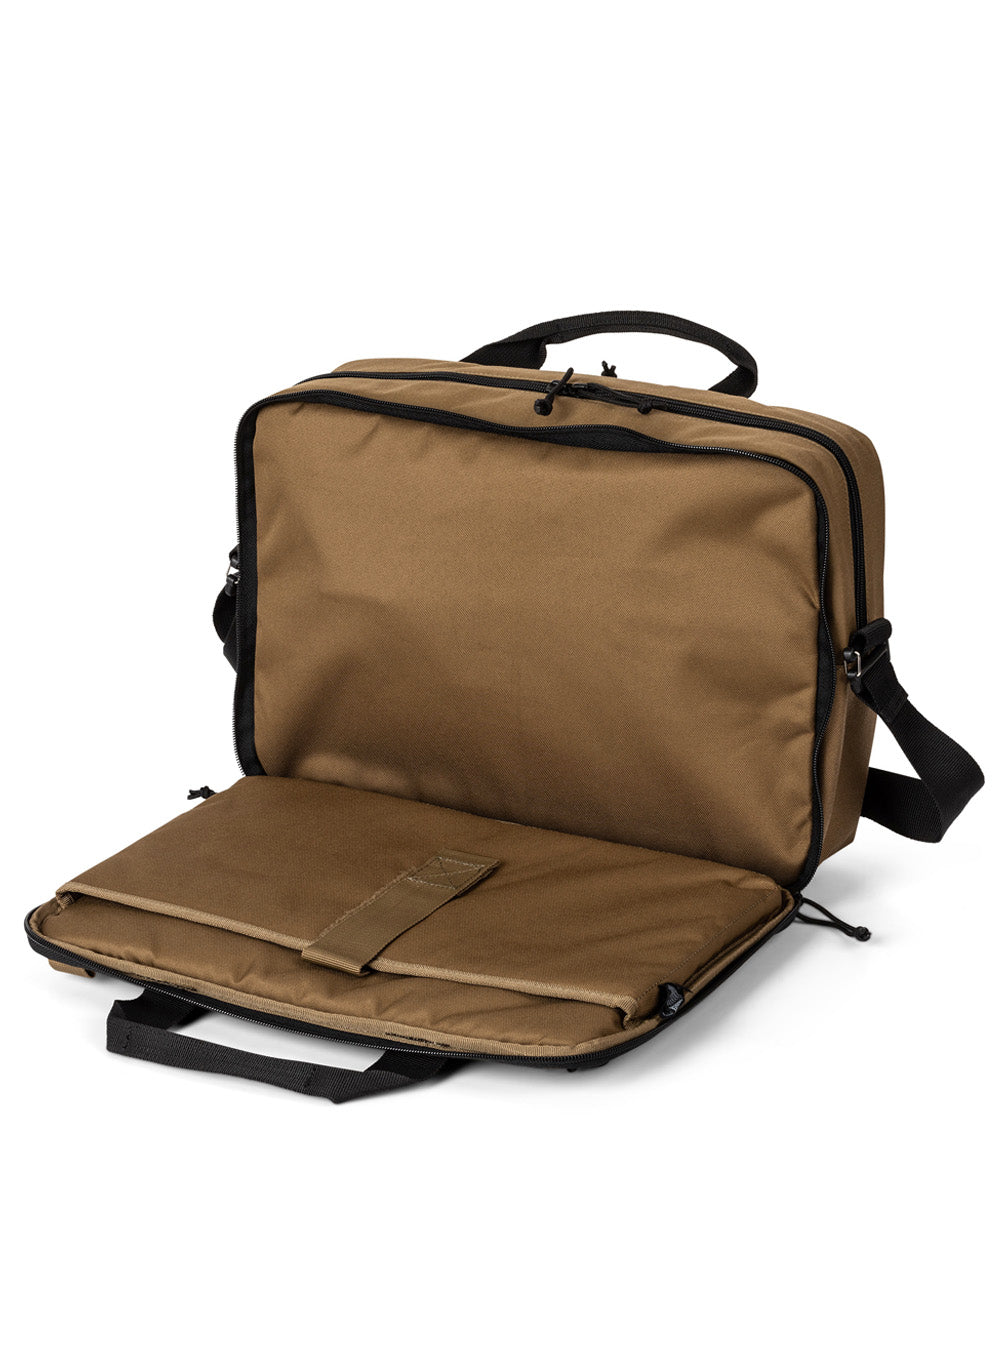 5.11 Tactical Overwatch Briefcase - TacSource